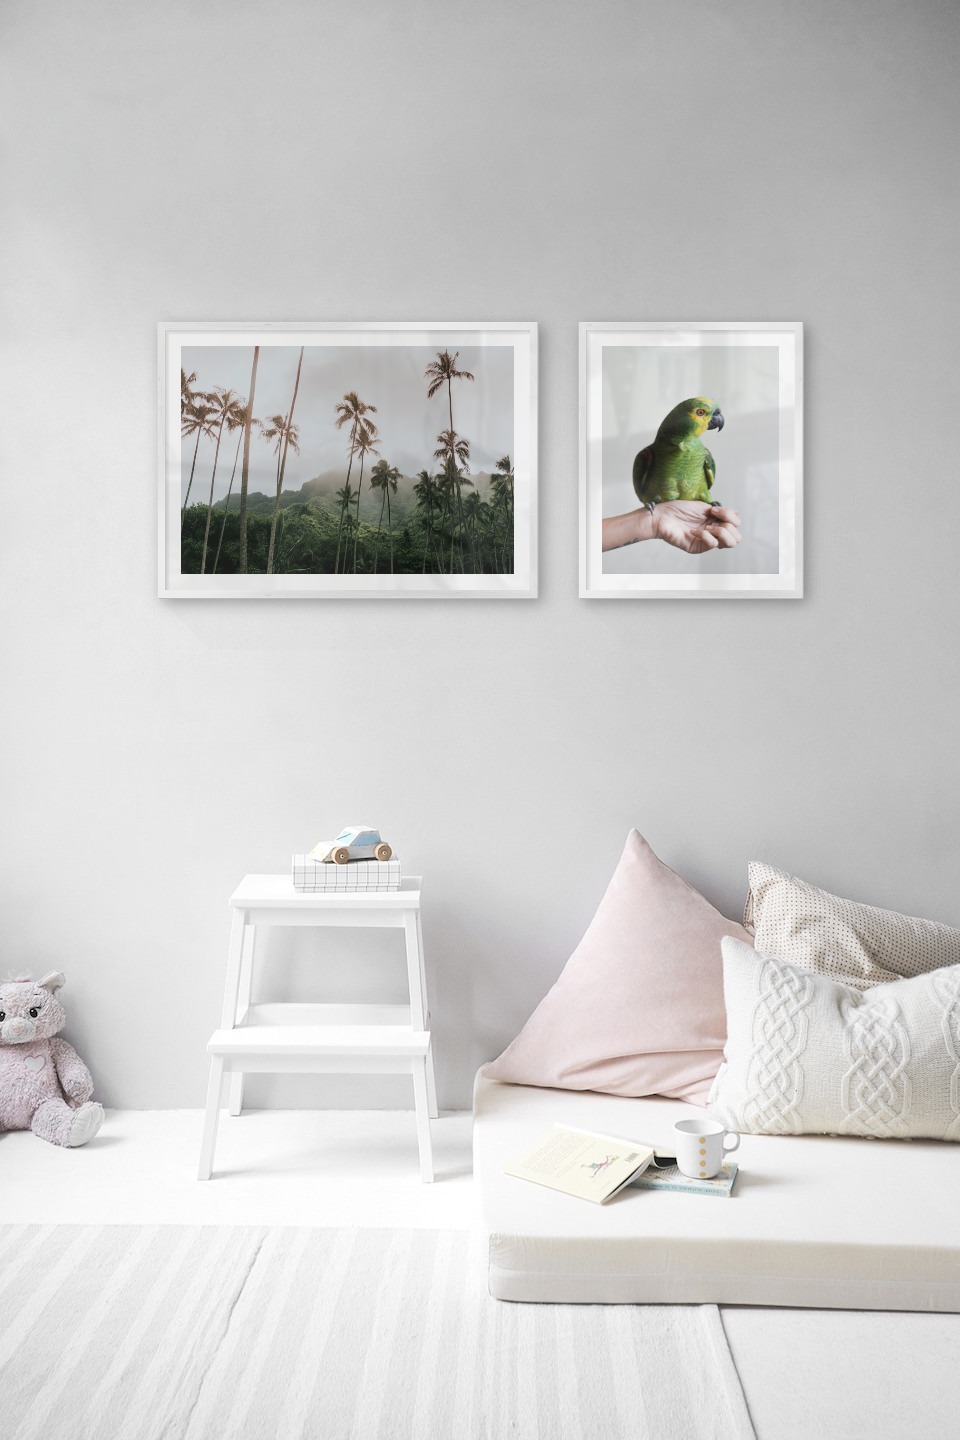 Gallery wall with picture frames in silver in sizes 50x70 and 40x50 with prints "Palm trees and mountains" and "Green parrot"